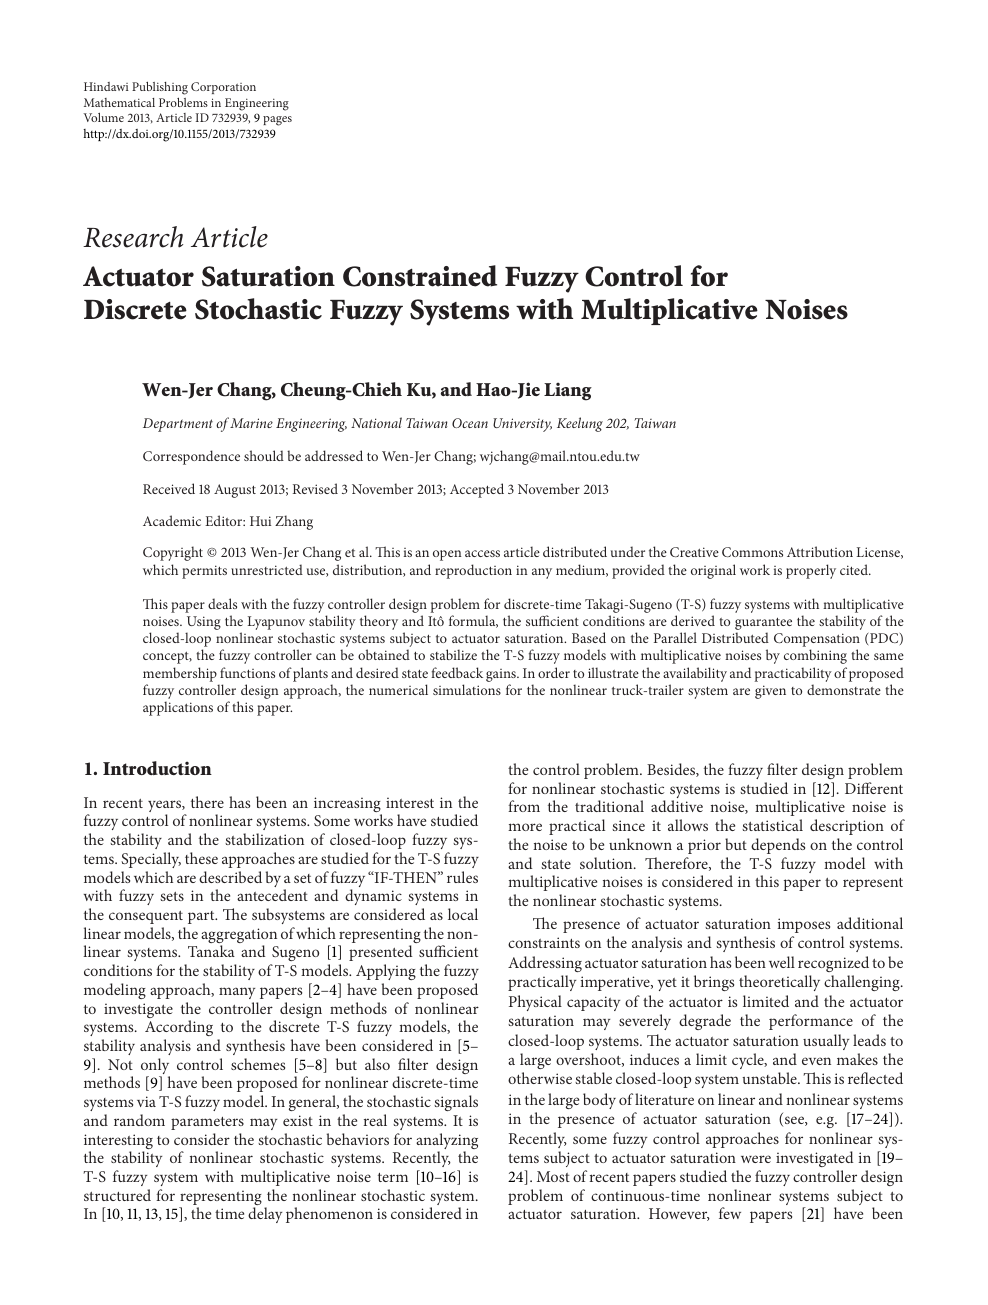 Actuator Saturation Constrained Fuzzy Control For Discrete Stochastic Fuzzy Systems With Multiplicative Noises Topic Of Research Paper In Mathematics Download Scholarly Article Pdf And Read For Free On Cyberleninka Open Science